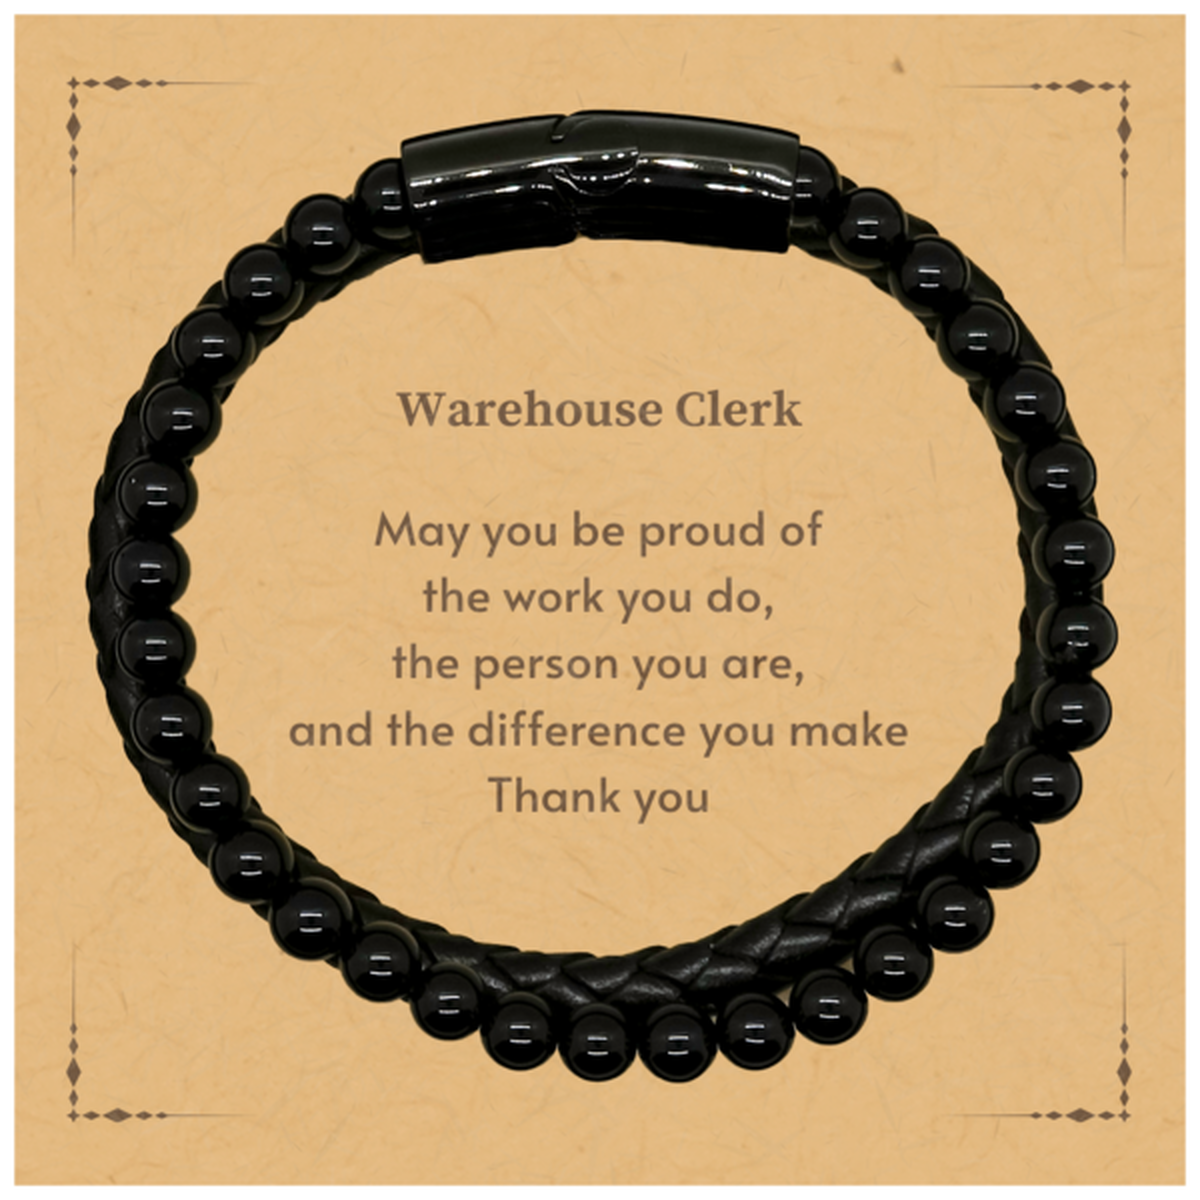 Heartwarming Stone Leather Bracelets Retirement Coworkers Gifts for Warehouse Clerk, Warehouse Clerk May You be proud of the work you do, the person you are Gifts for Boss Men Women Friends